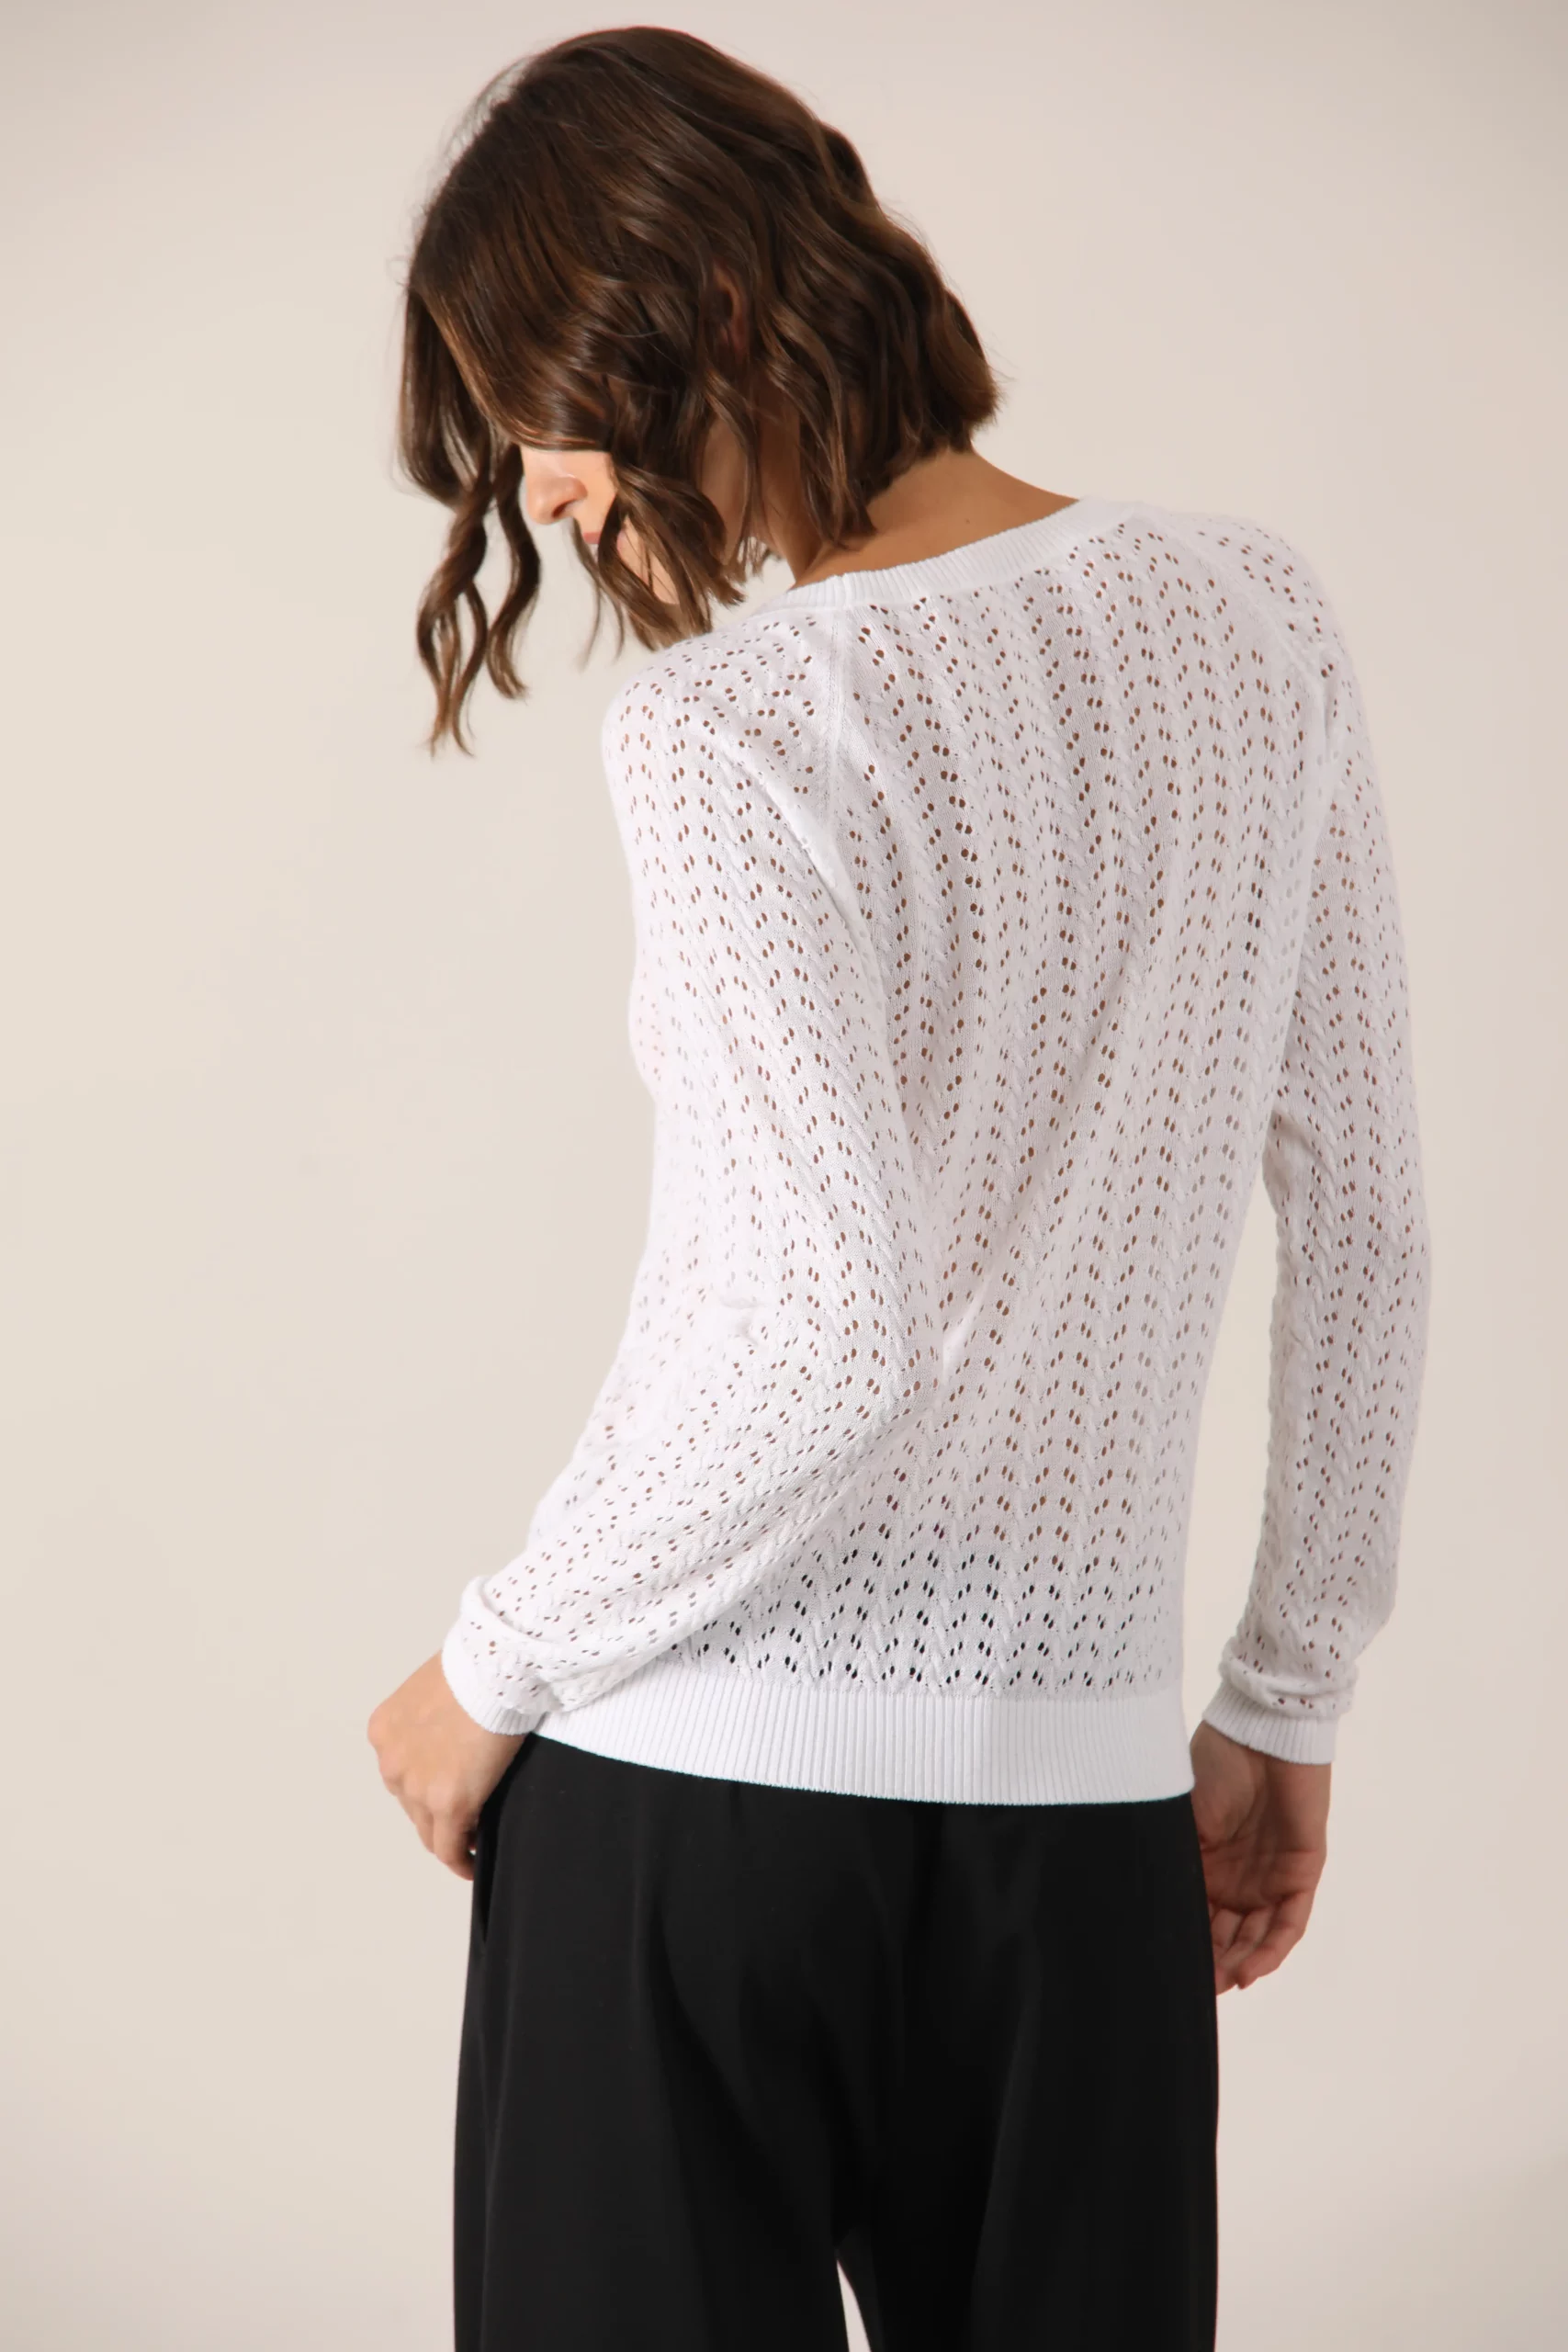 White cotton crew neck, with a relaxed but elegant cut. The openwork adds a romantic but sober dimension.